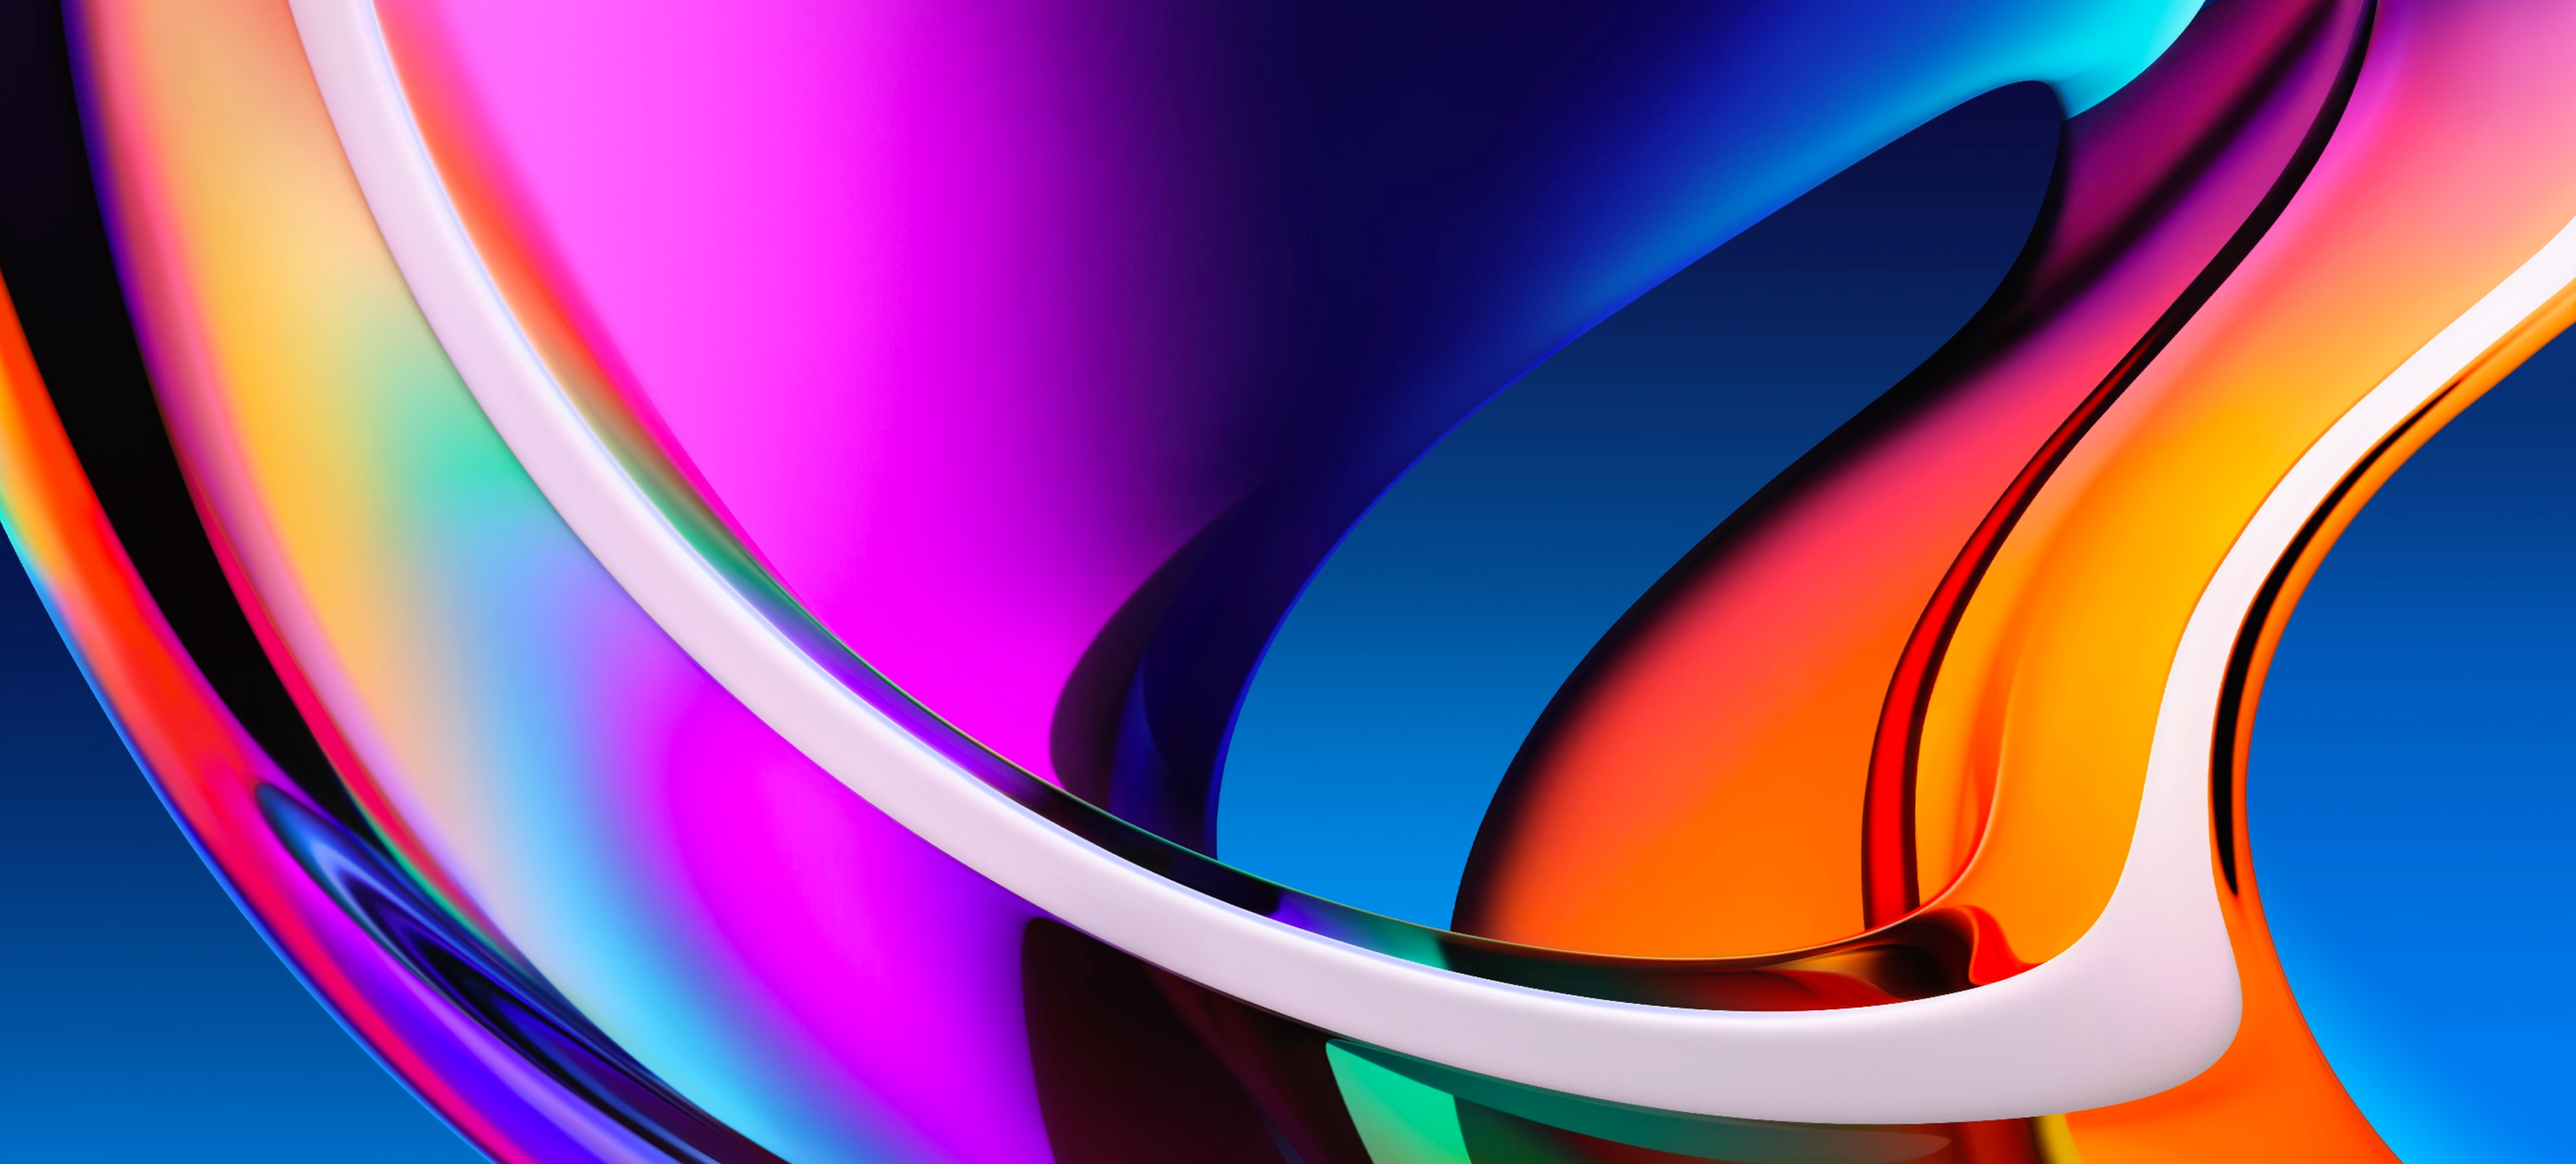 New iMac 27" (mid 2020) Official Wallpaper - Wallpapers Central